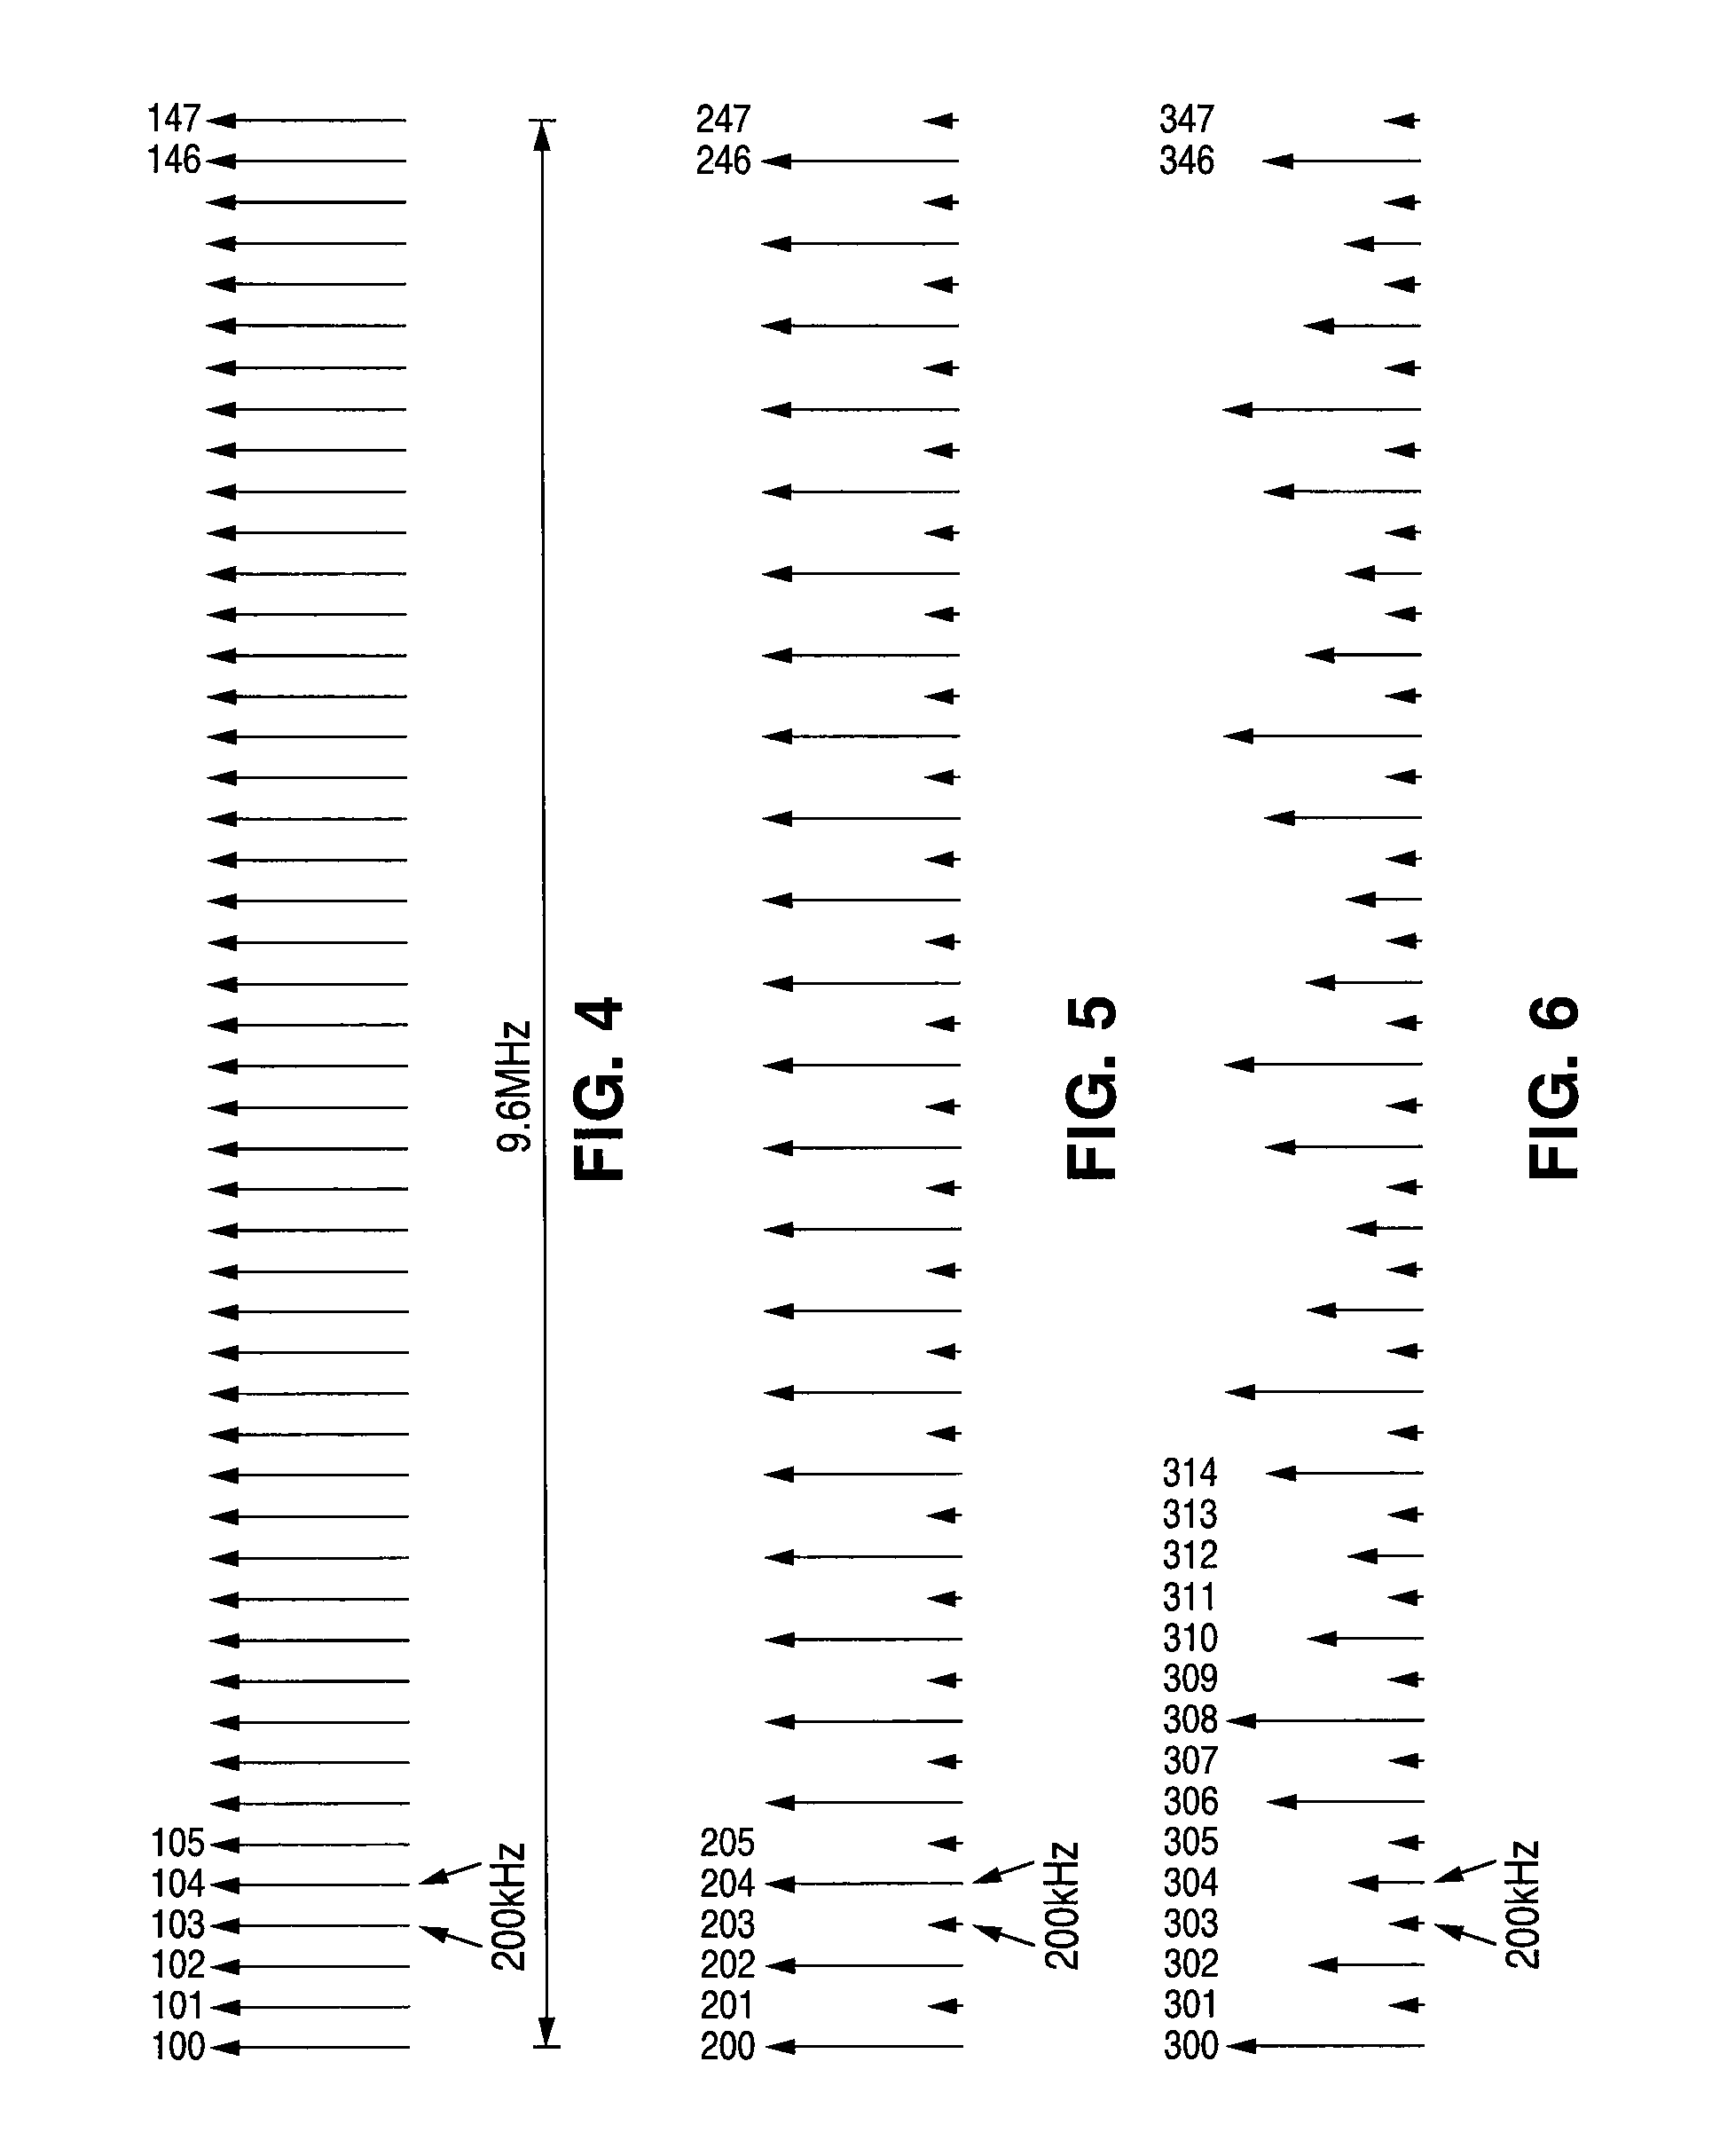 Method for testing radio frequency (RF) receiver to provide power correction data